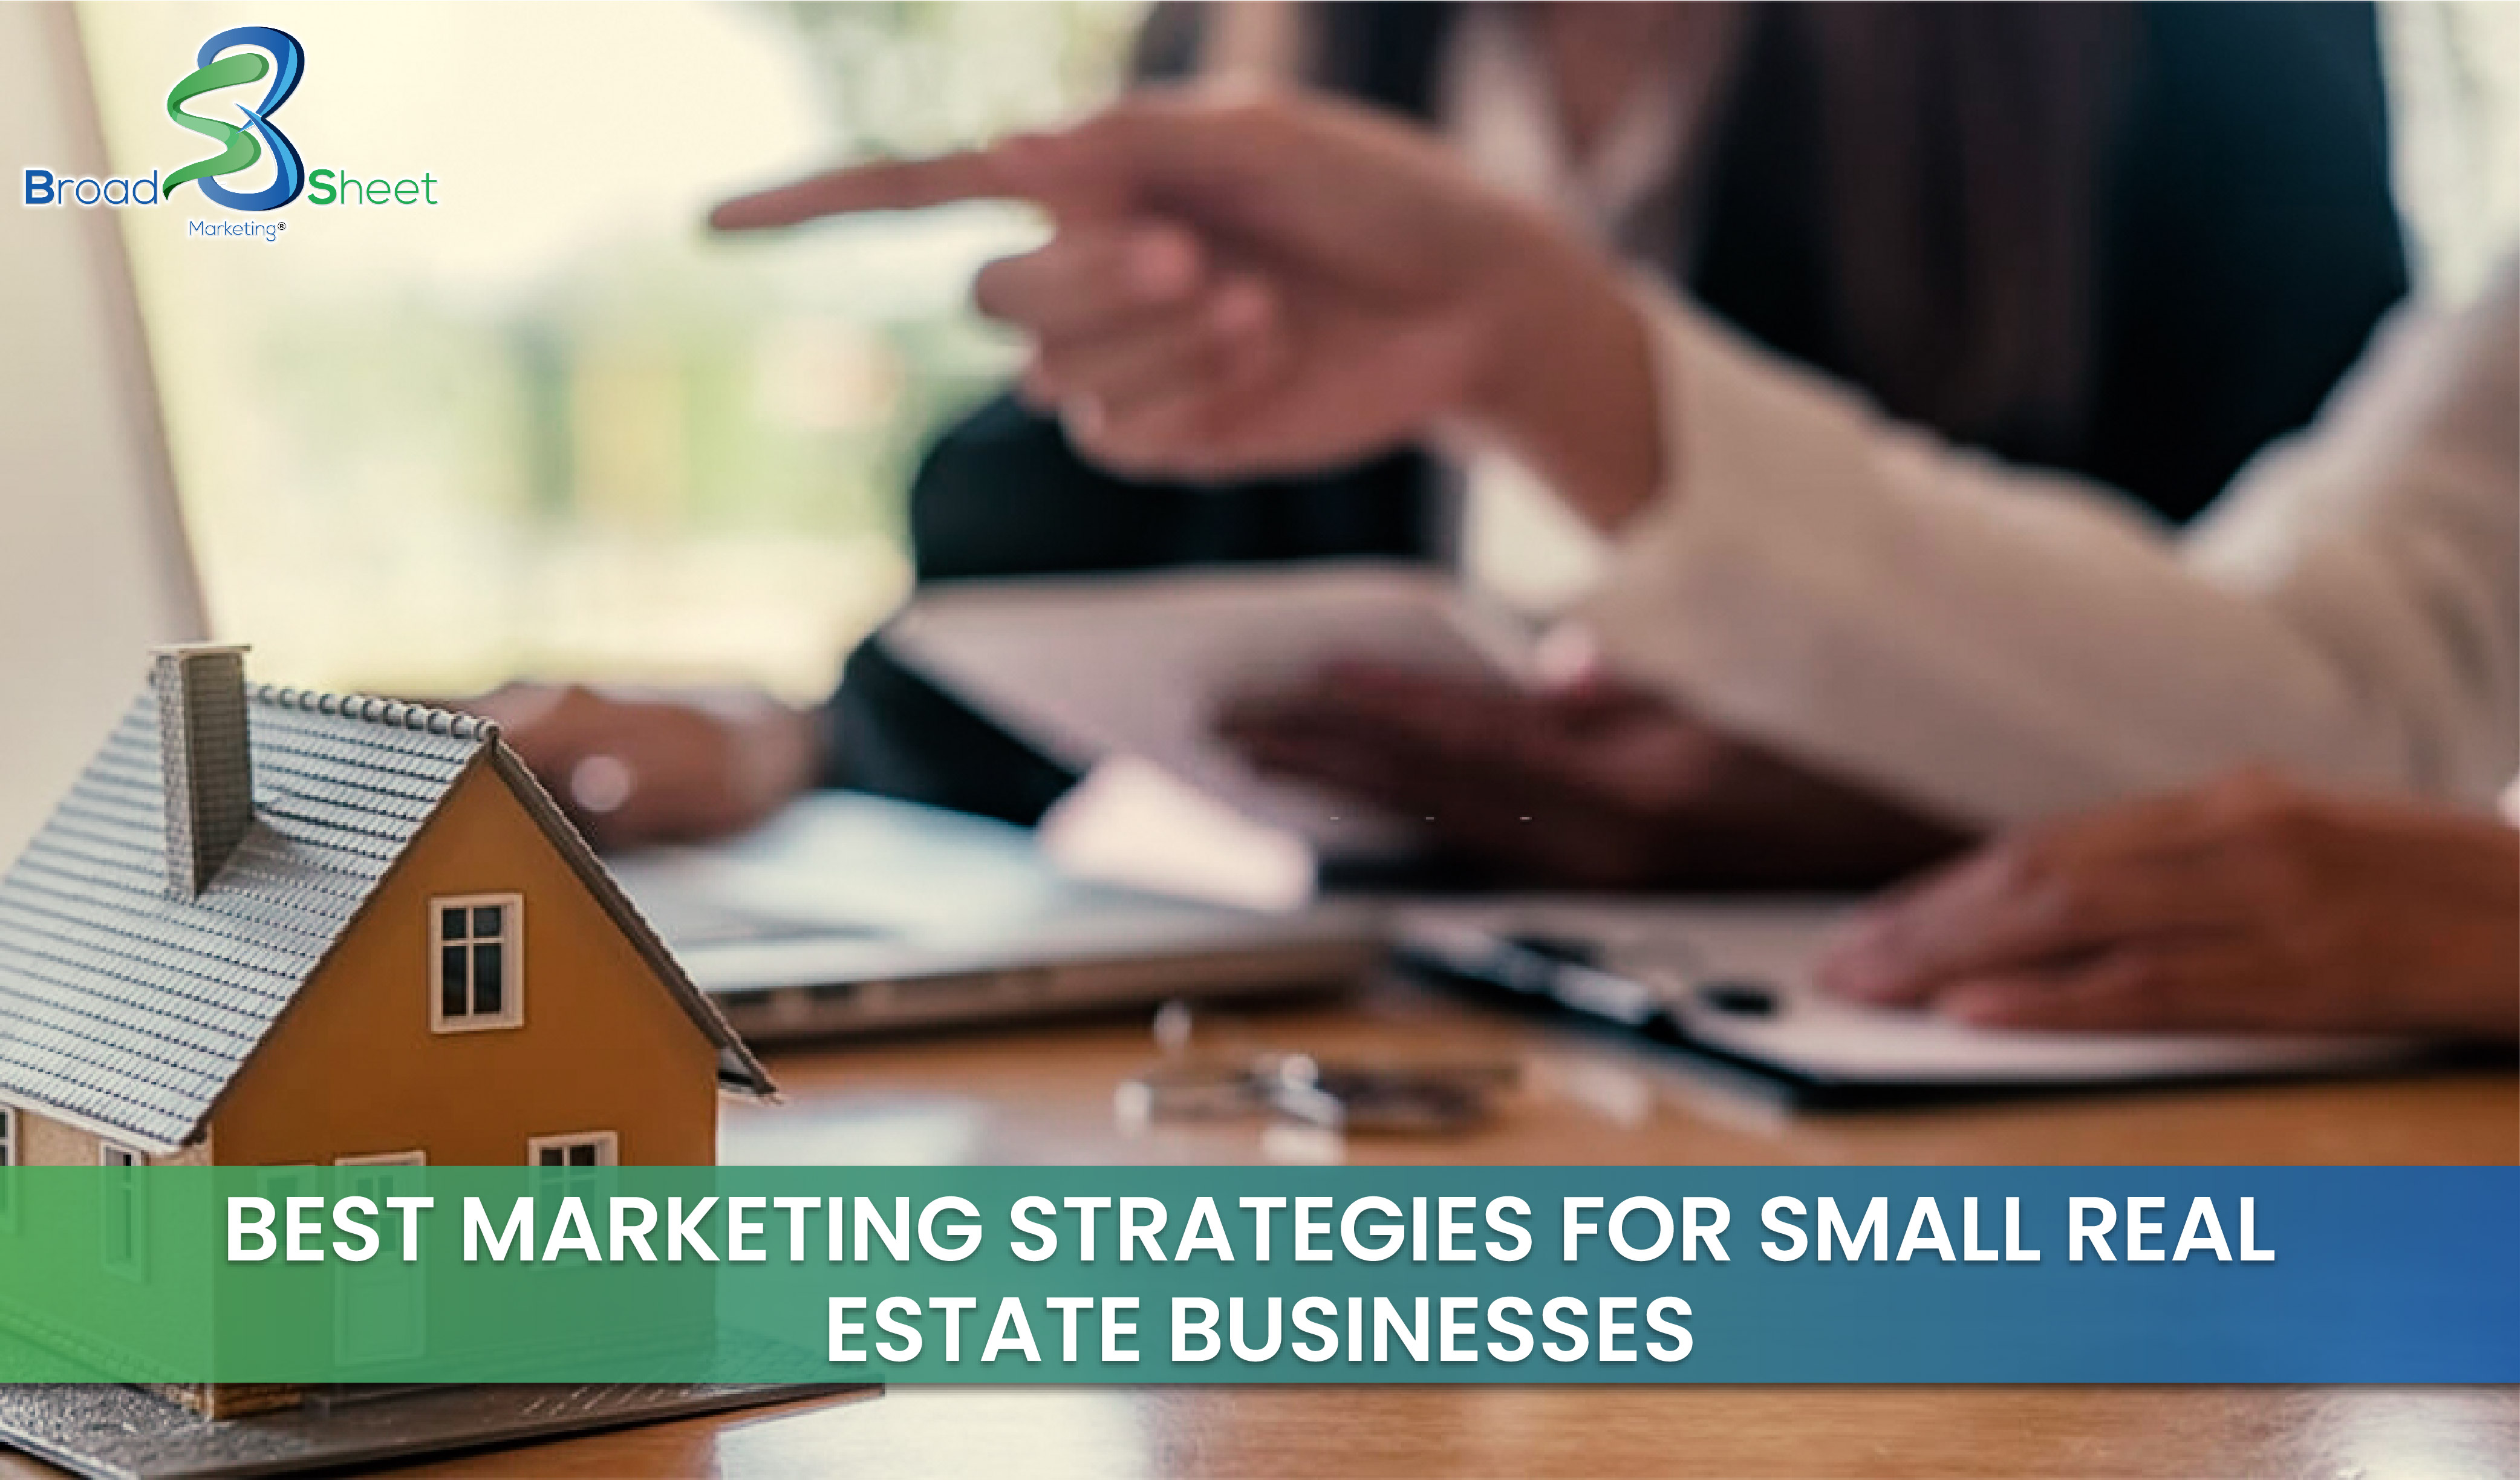 Best Marketing Strategies for Small Real Estate Businesses